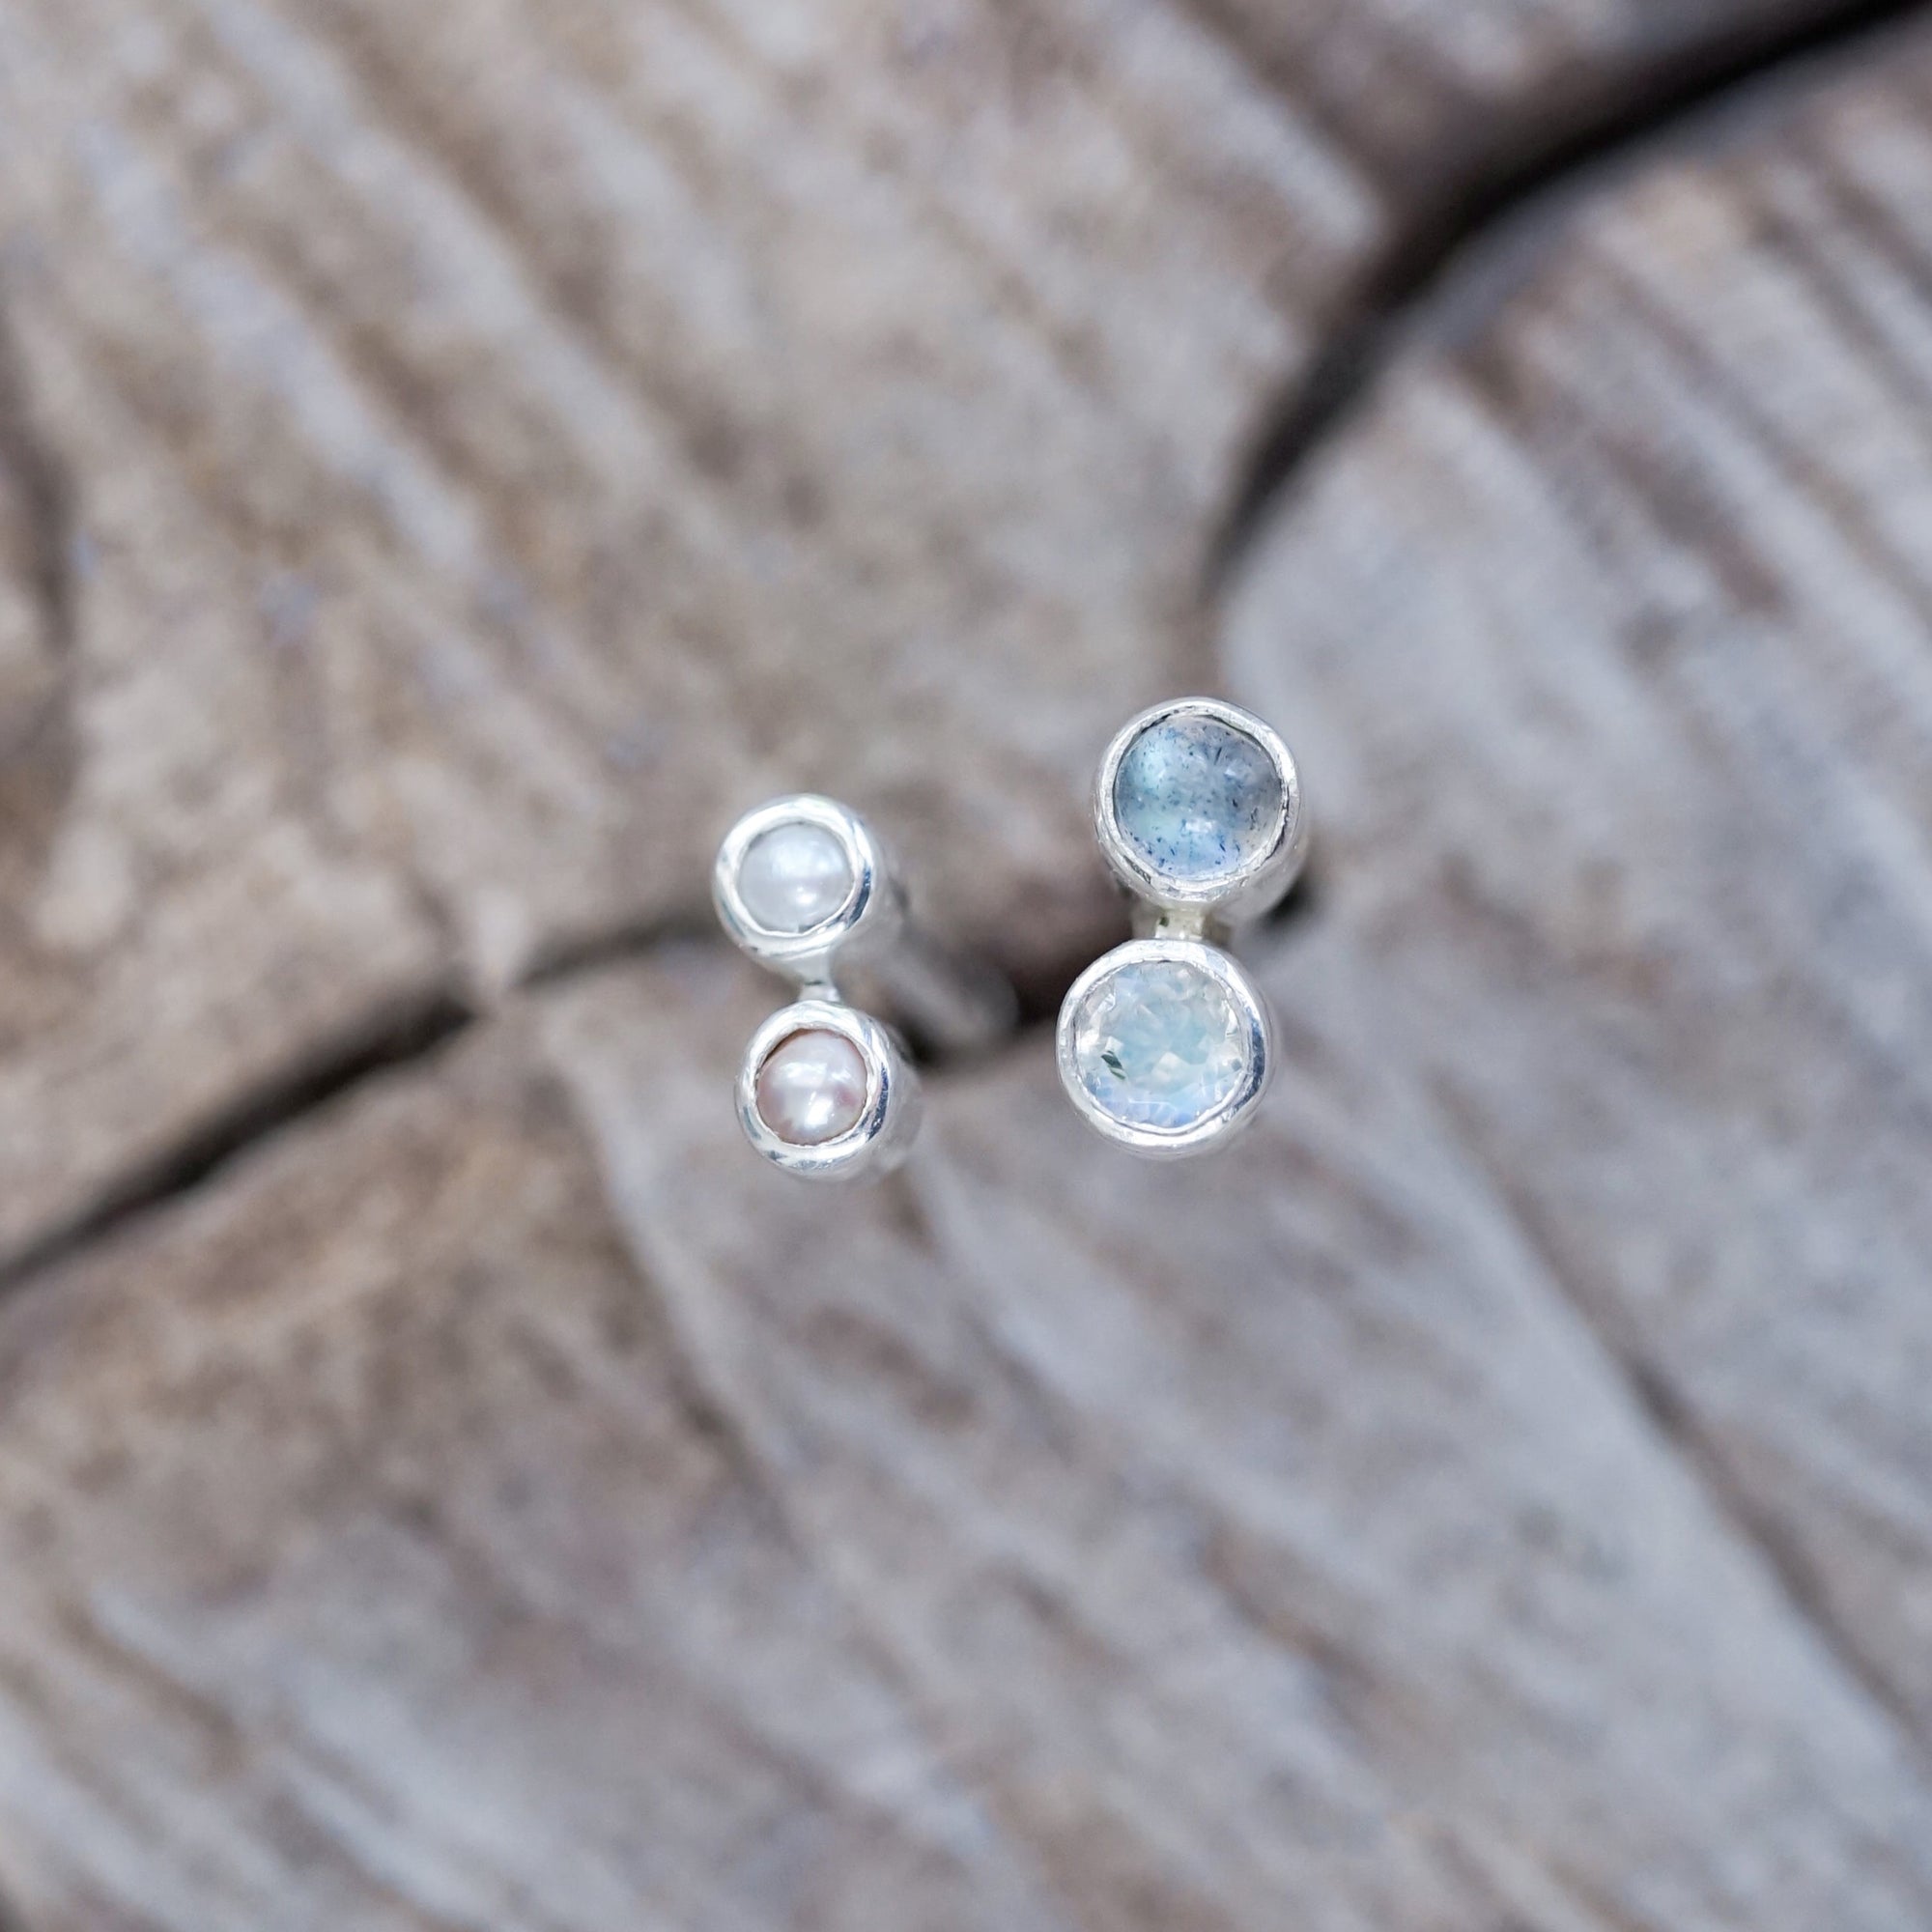 Labradorite, Pearl and Moonstone Earrings - Gardens of the Sun | Ethical Jewelry